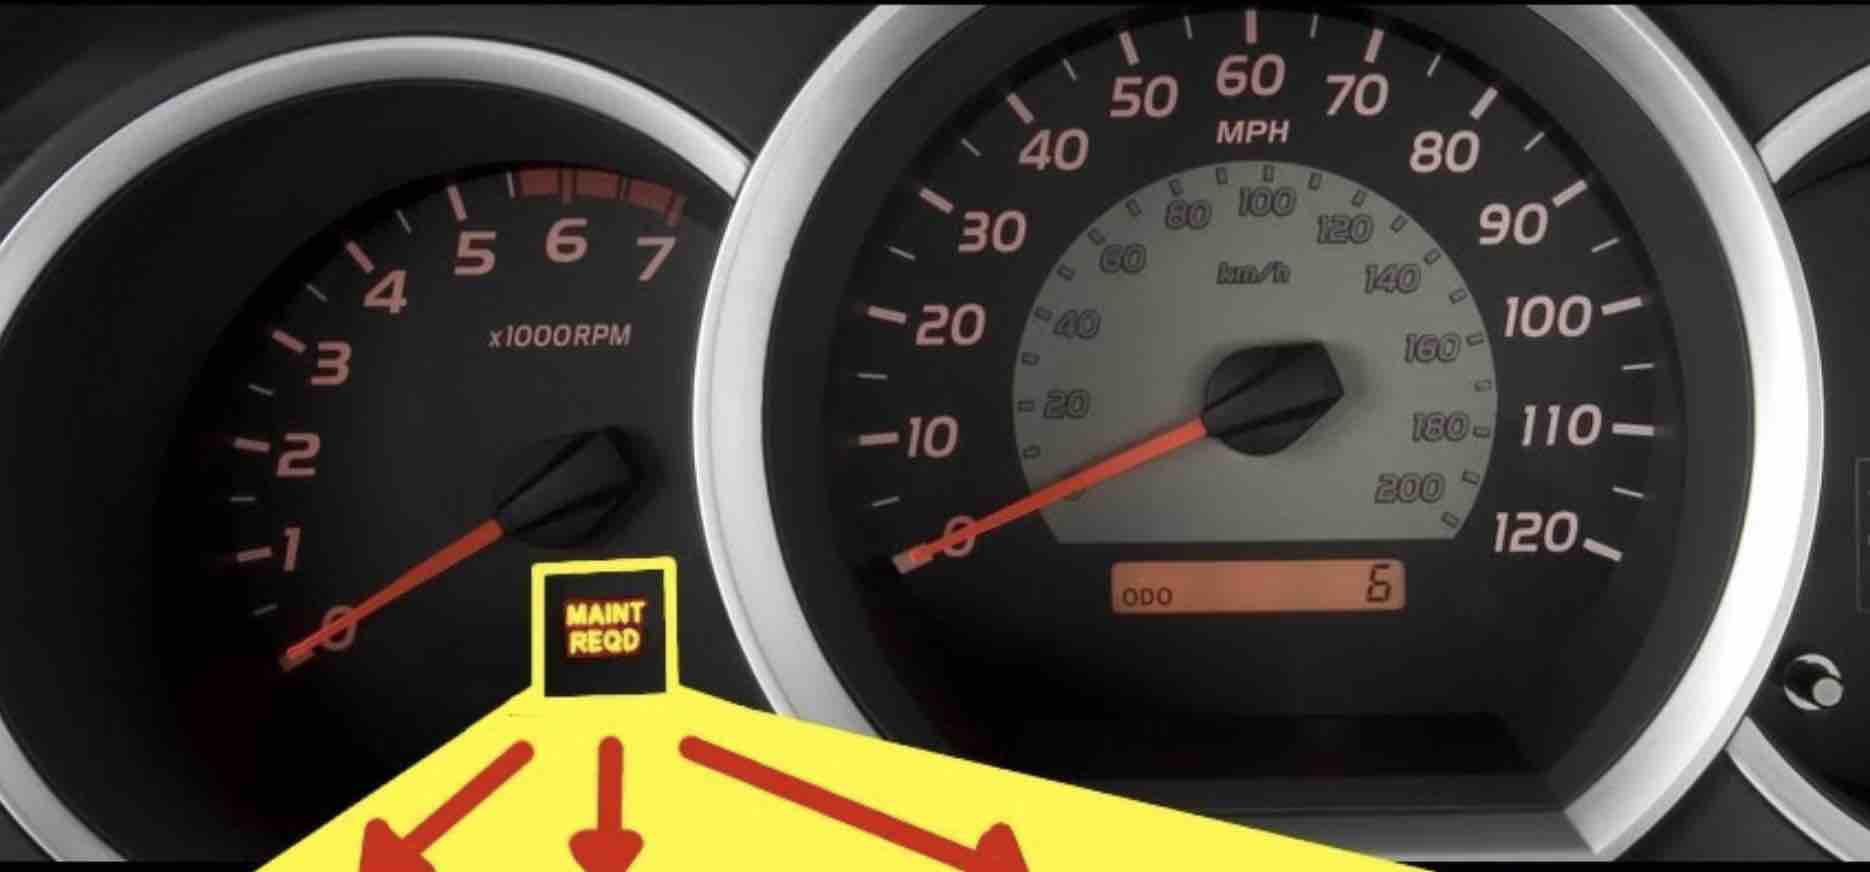 How To Turn Off The Maintenance Required Light 4 Easy Steps To Reset Maintenance Required Light Toyota Tacoma.